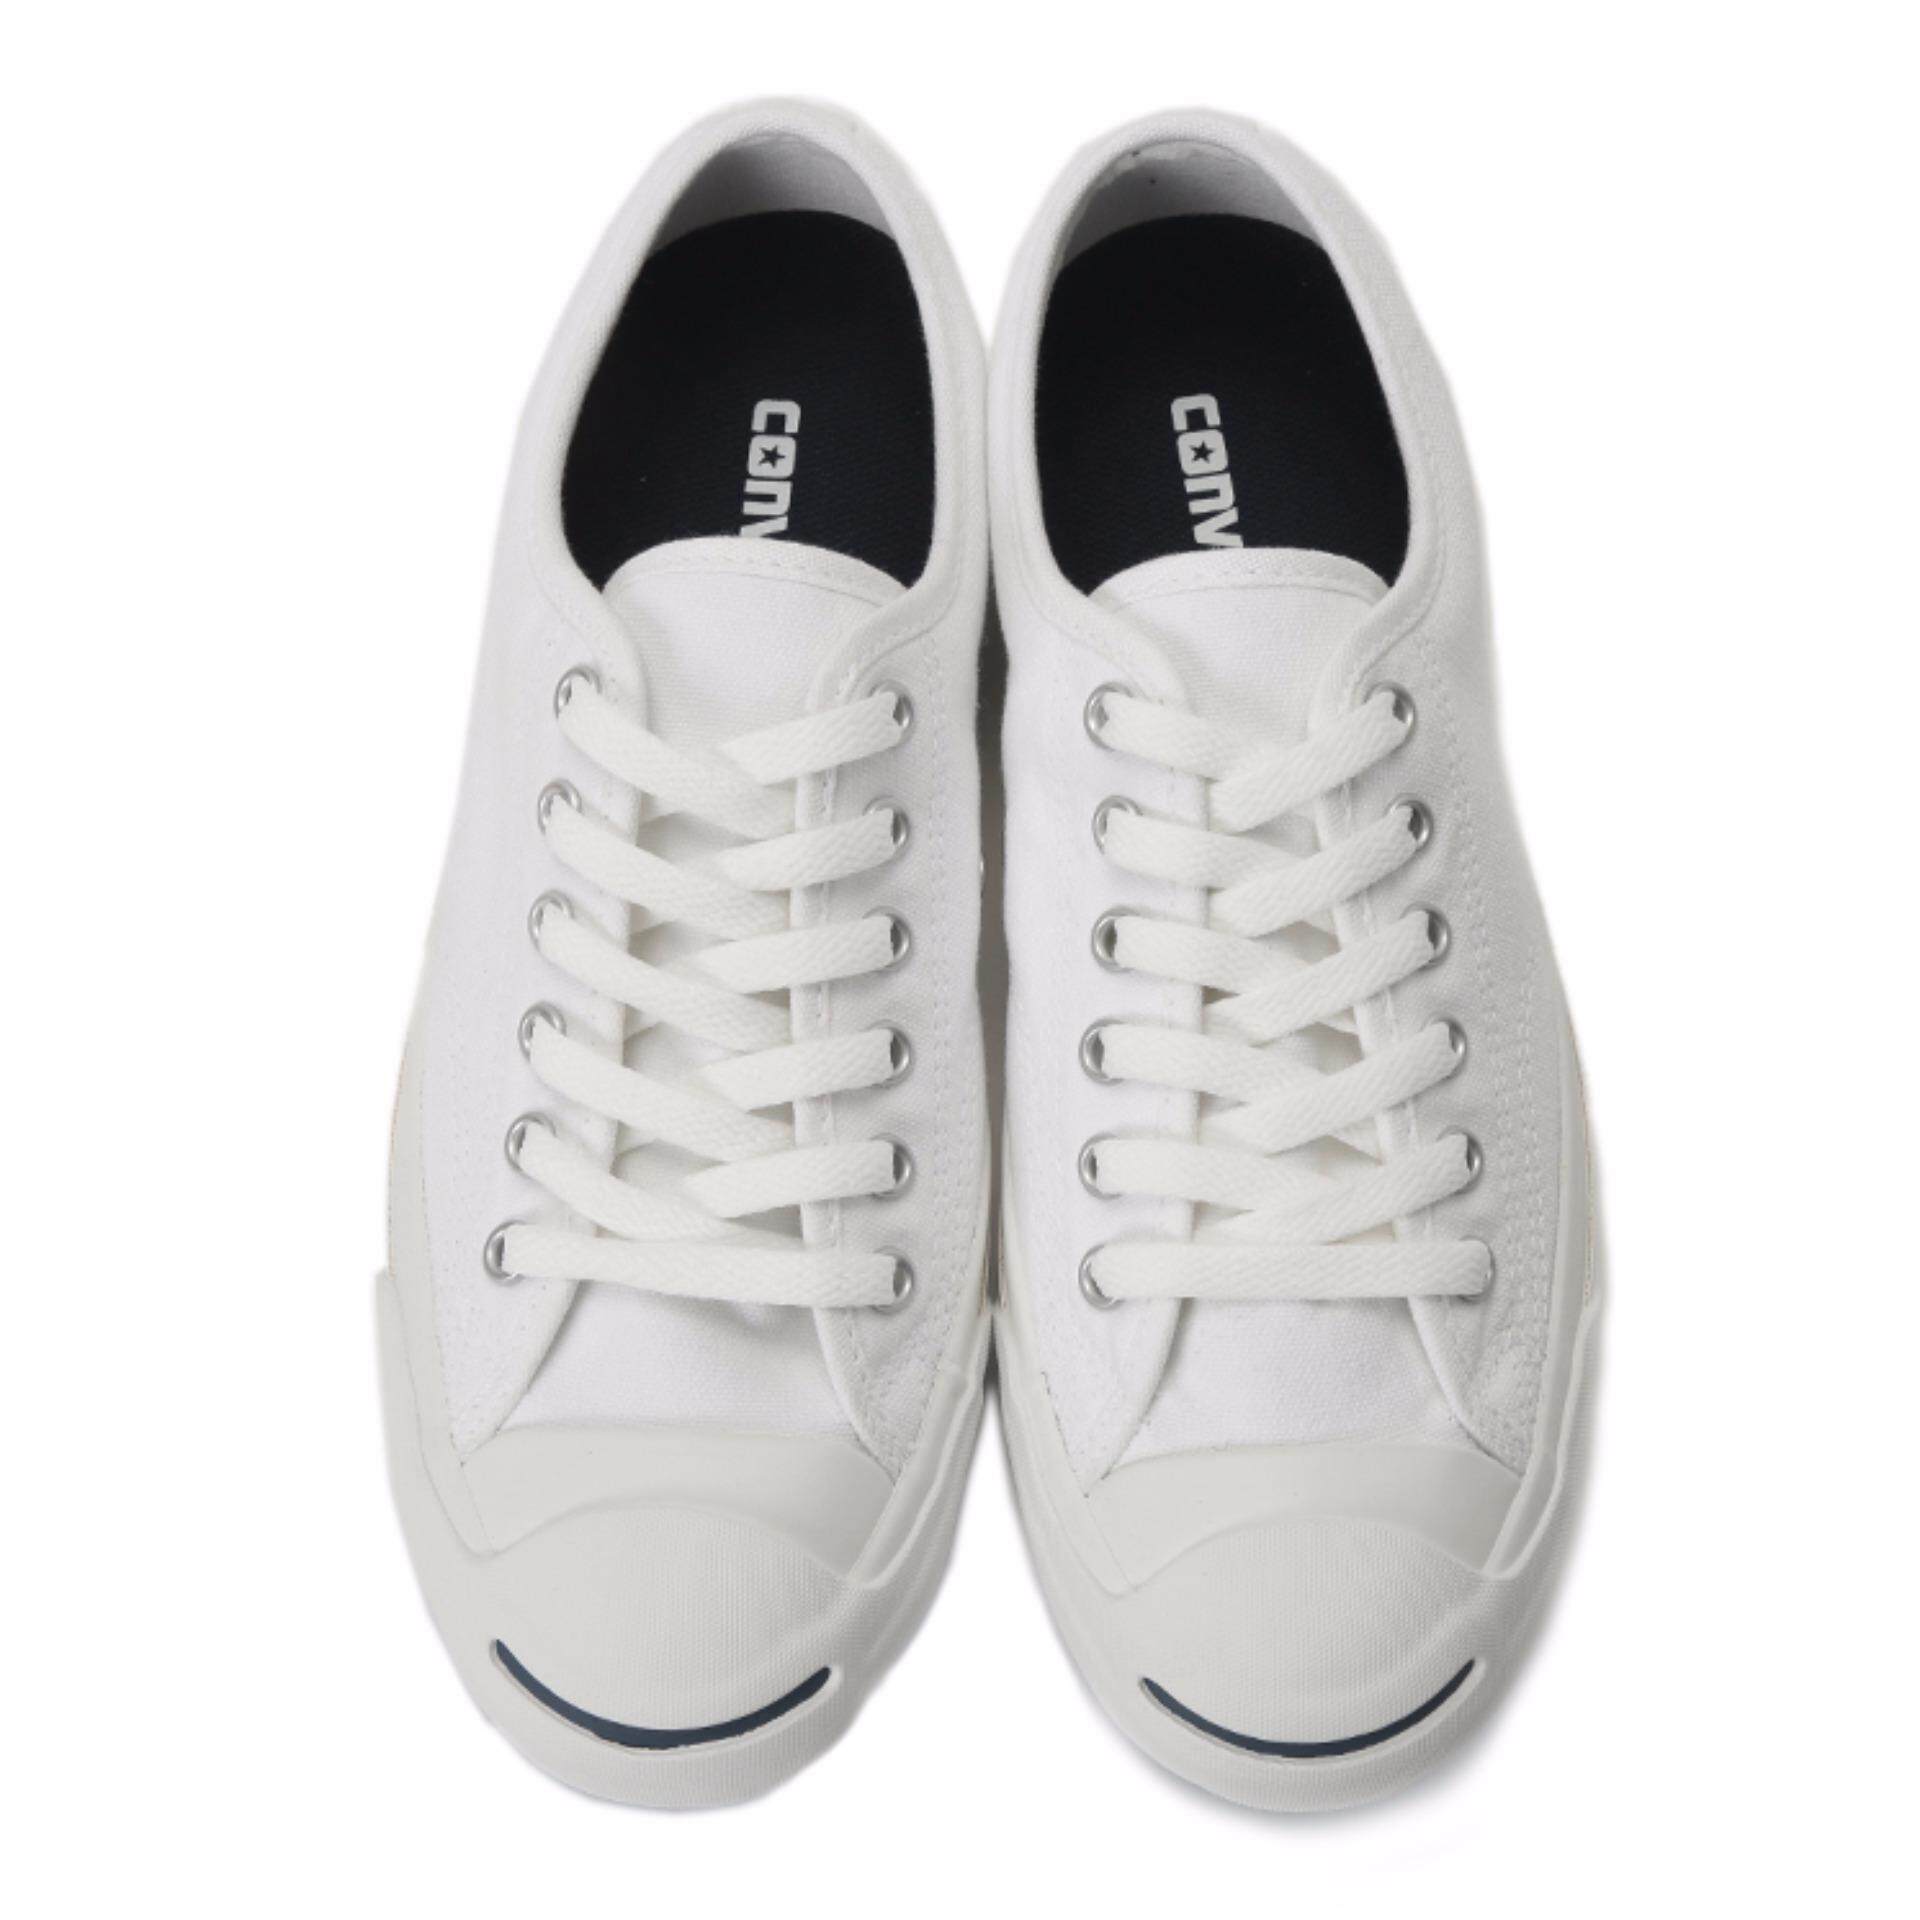 converse jack purcell japan edition 